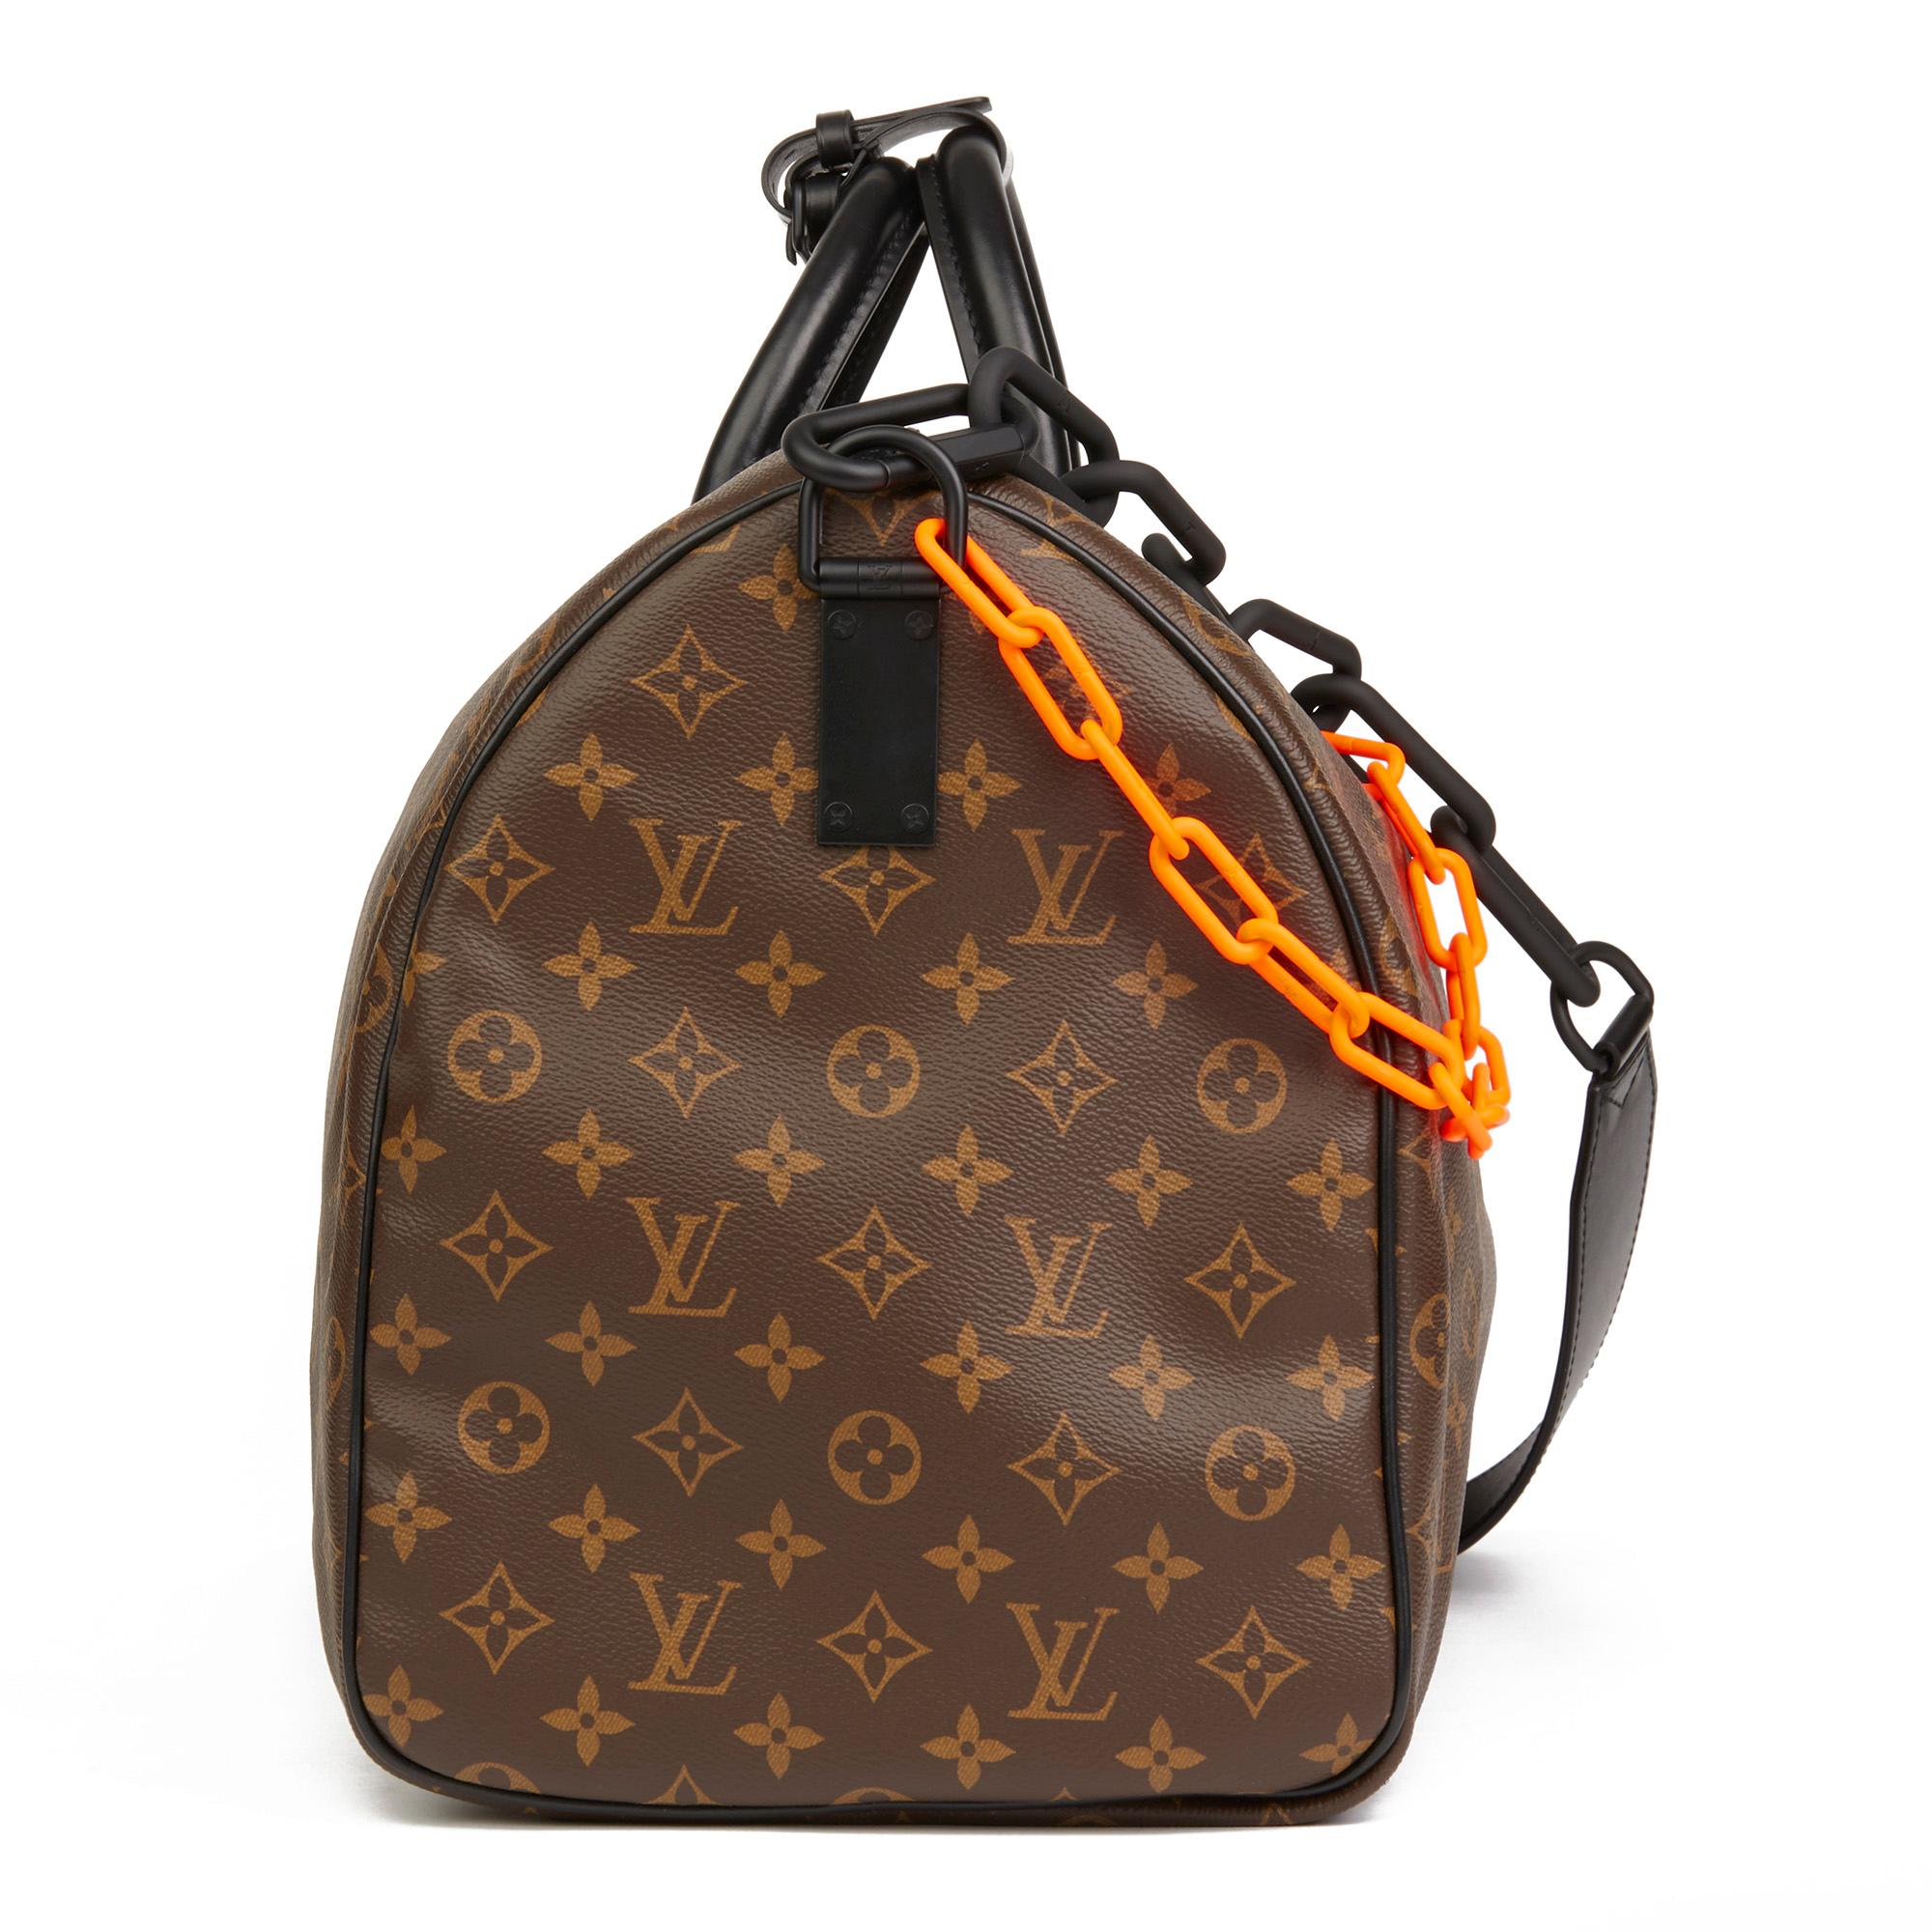 LOUIS VUITTON
Brown Monogram Coated Canvas & Black Calfskin Leather Virgil Abloh Keepall Bandouliere 50

Reference: HB2826
Serial Number: AA0189
Age (Circa): 2019
Accompanied By: Louis Vuitton Dust Bag, Box, Padlock, Keys, Shoulder Strap, Luggage